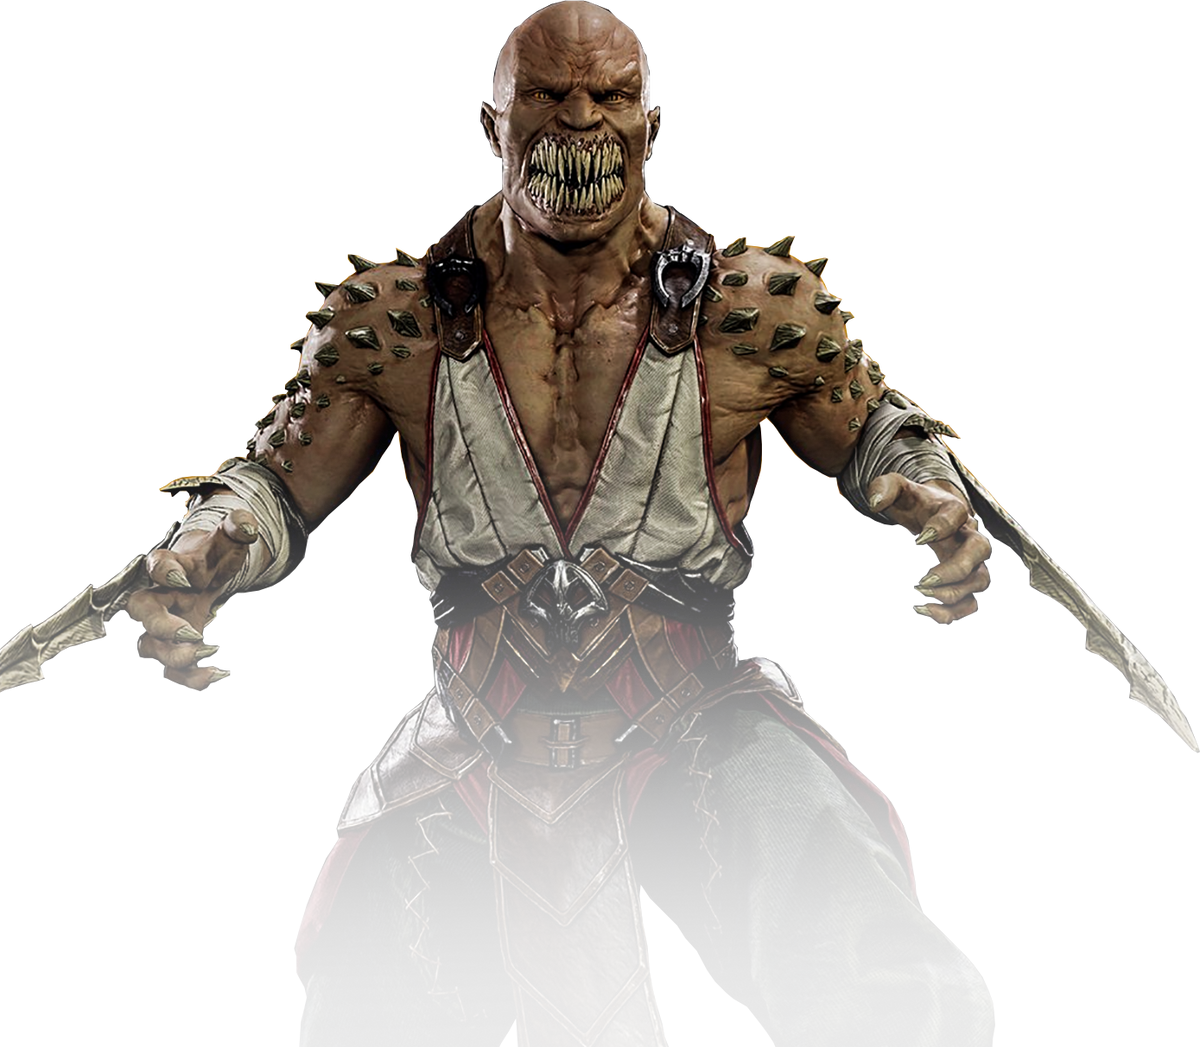 Baraka's Transformation: From Minor Antagonist to Potential Hero